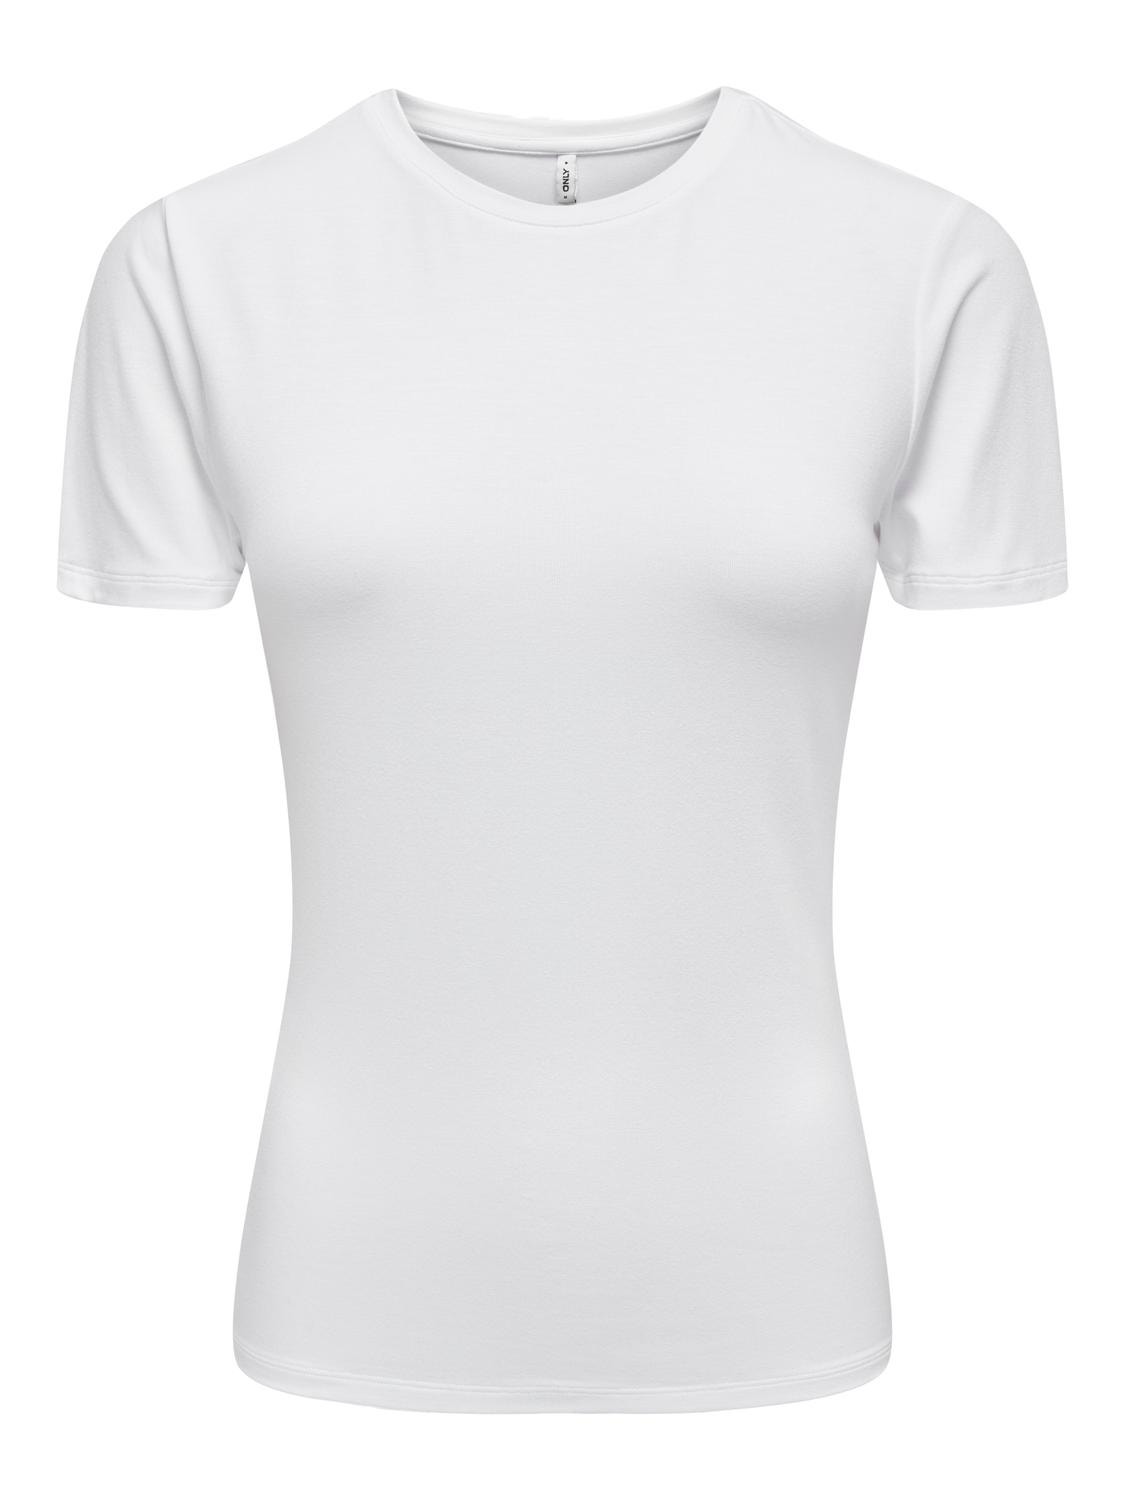 ONLY Basis t-shirt -White - 15339569